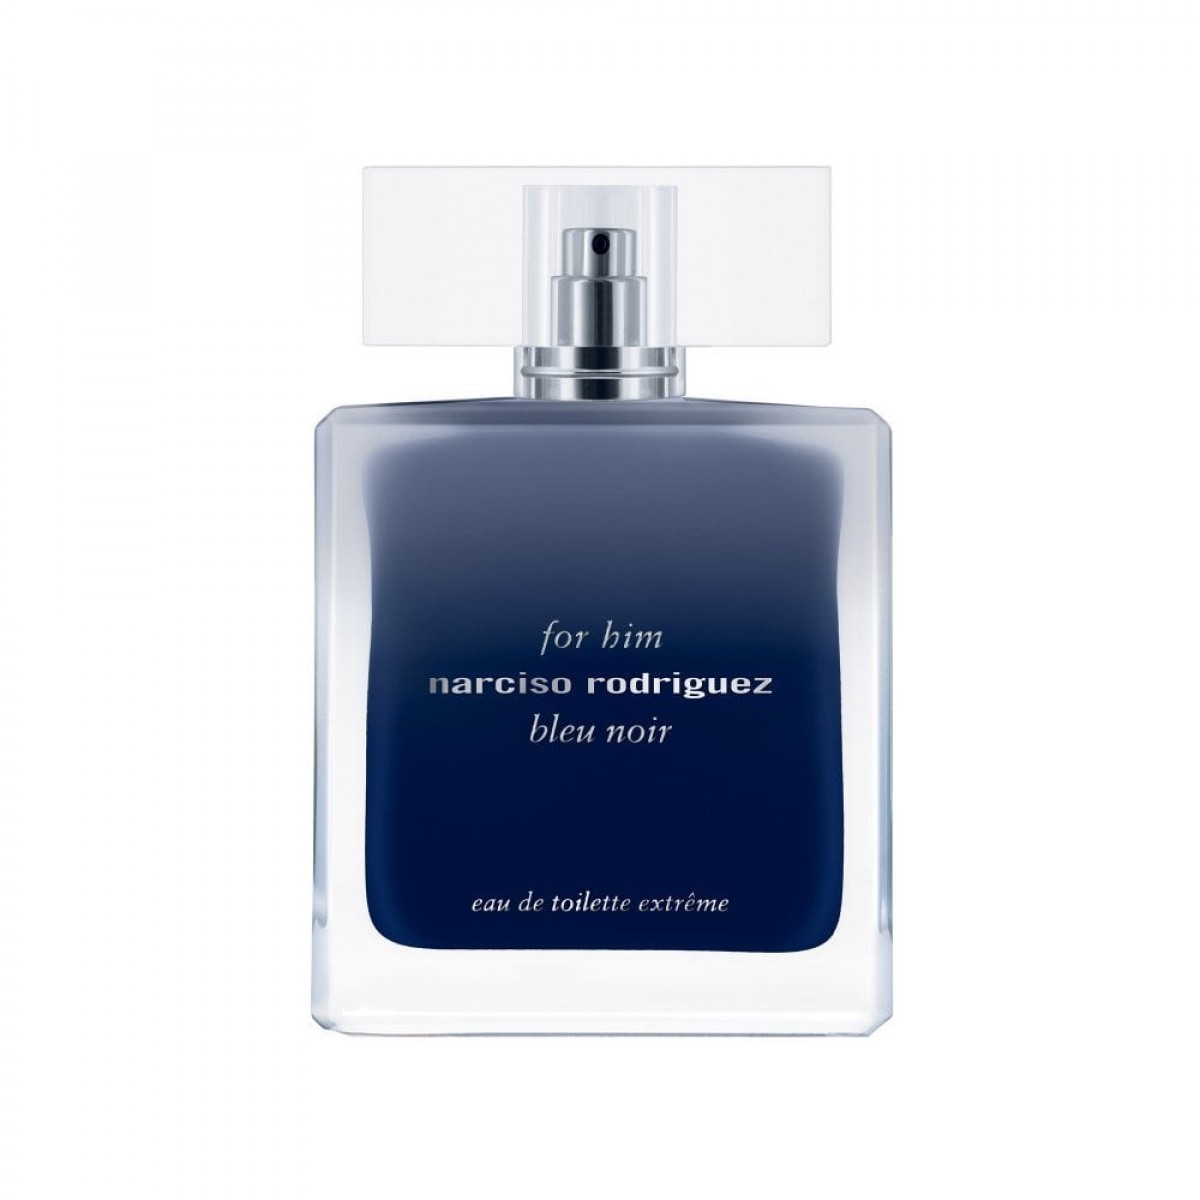 Narciso rodriguez for him bleu. Туалетная вода мужская Narciso Rodriguez for him bleu Noir extreme, 50 мл. Narciso Rodriguez bleu Noir extreme EDT 100 ml-. Narciso Rodriguez Blue Noir for him EDT, 100 ml. Narciso Rodriguez for him bleu Noir Eau de Toilette extreme туалетная вода 100 мл.